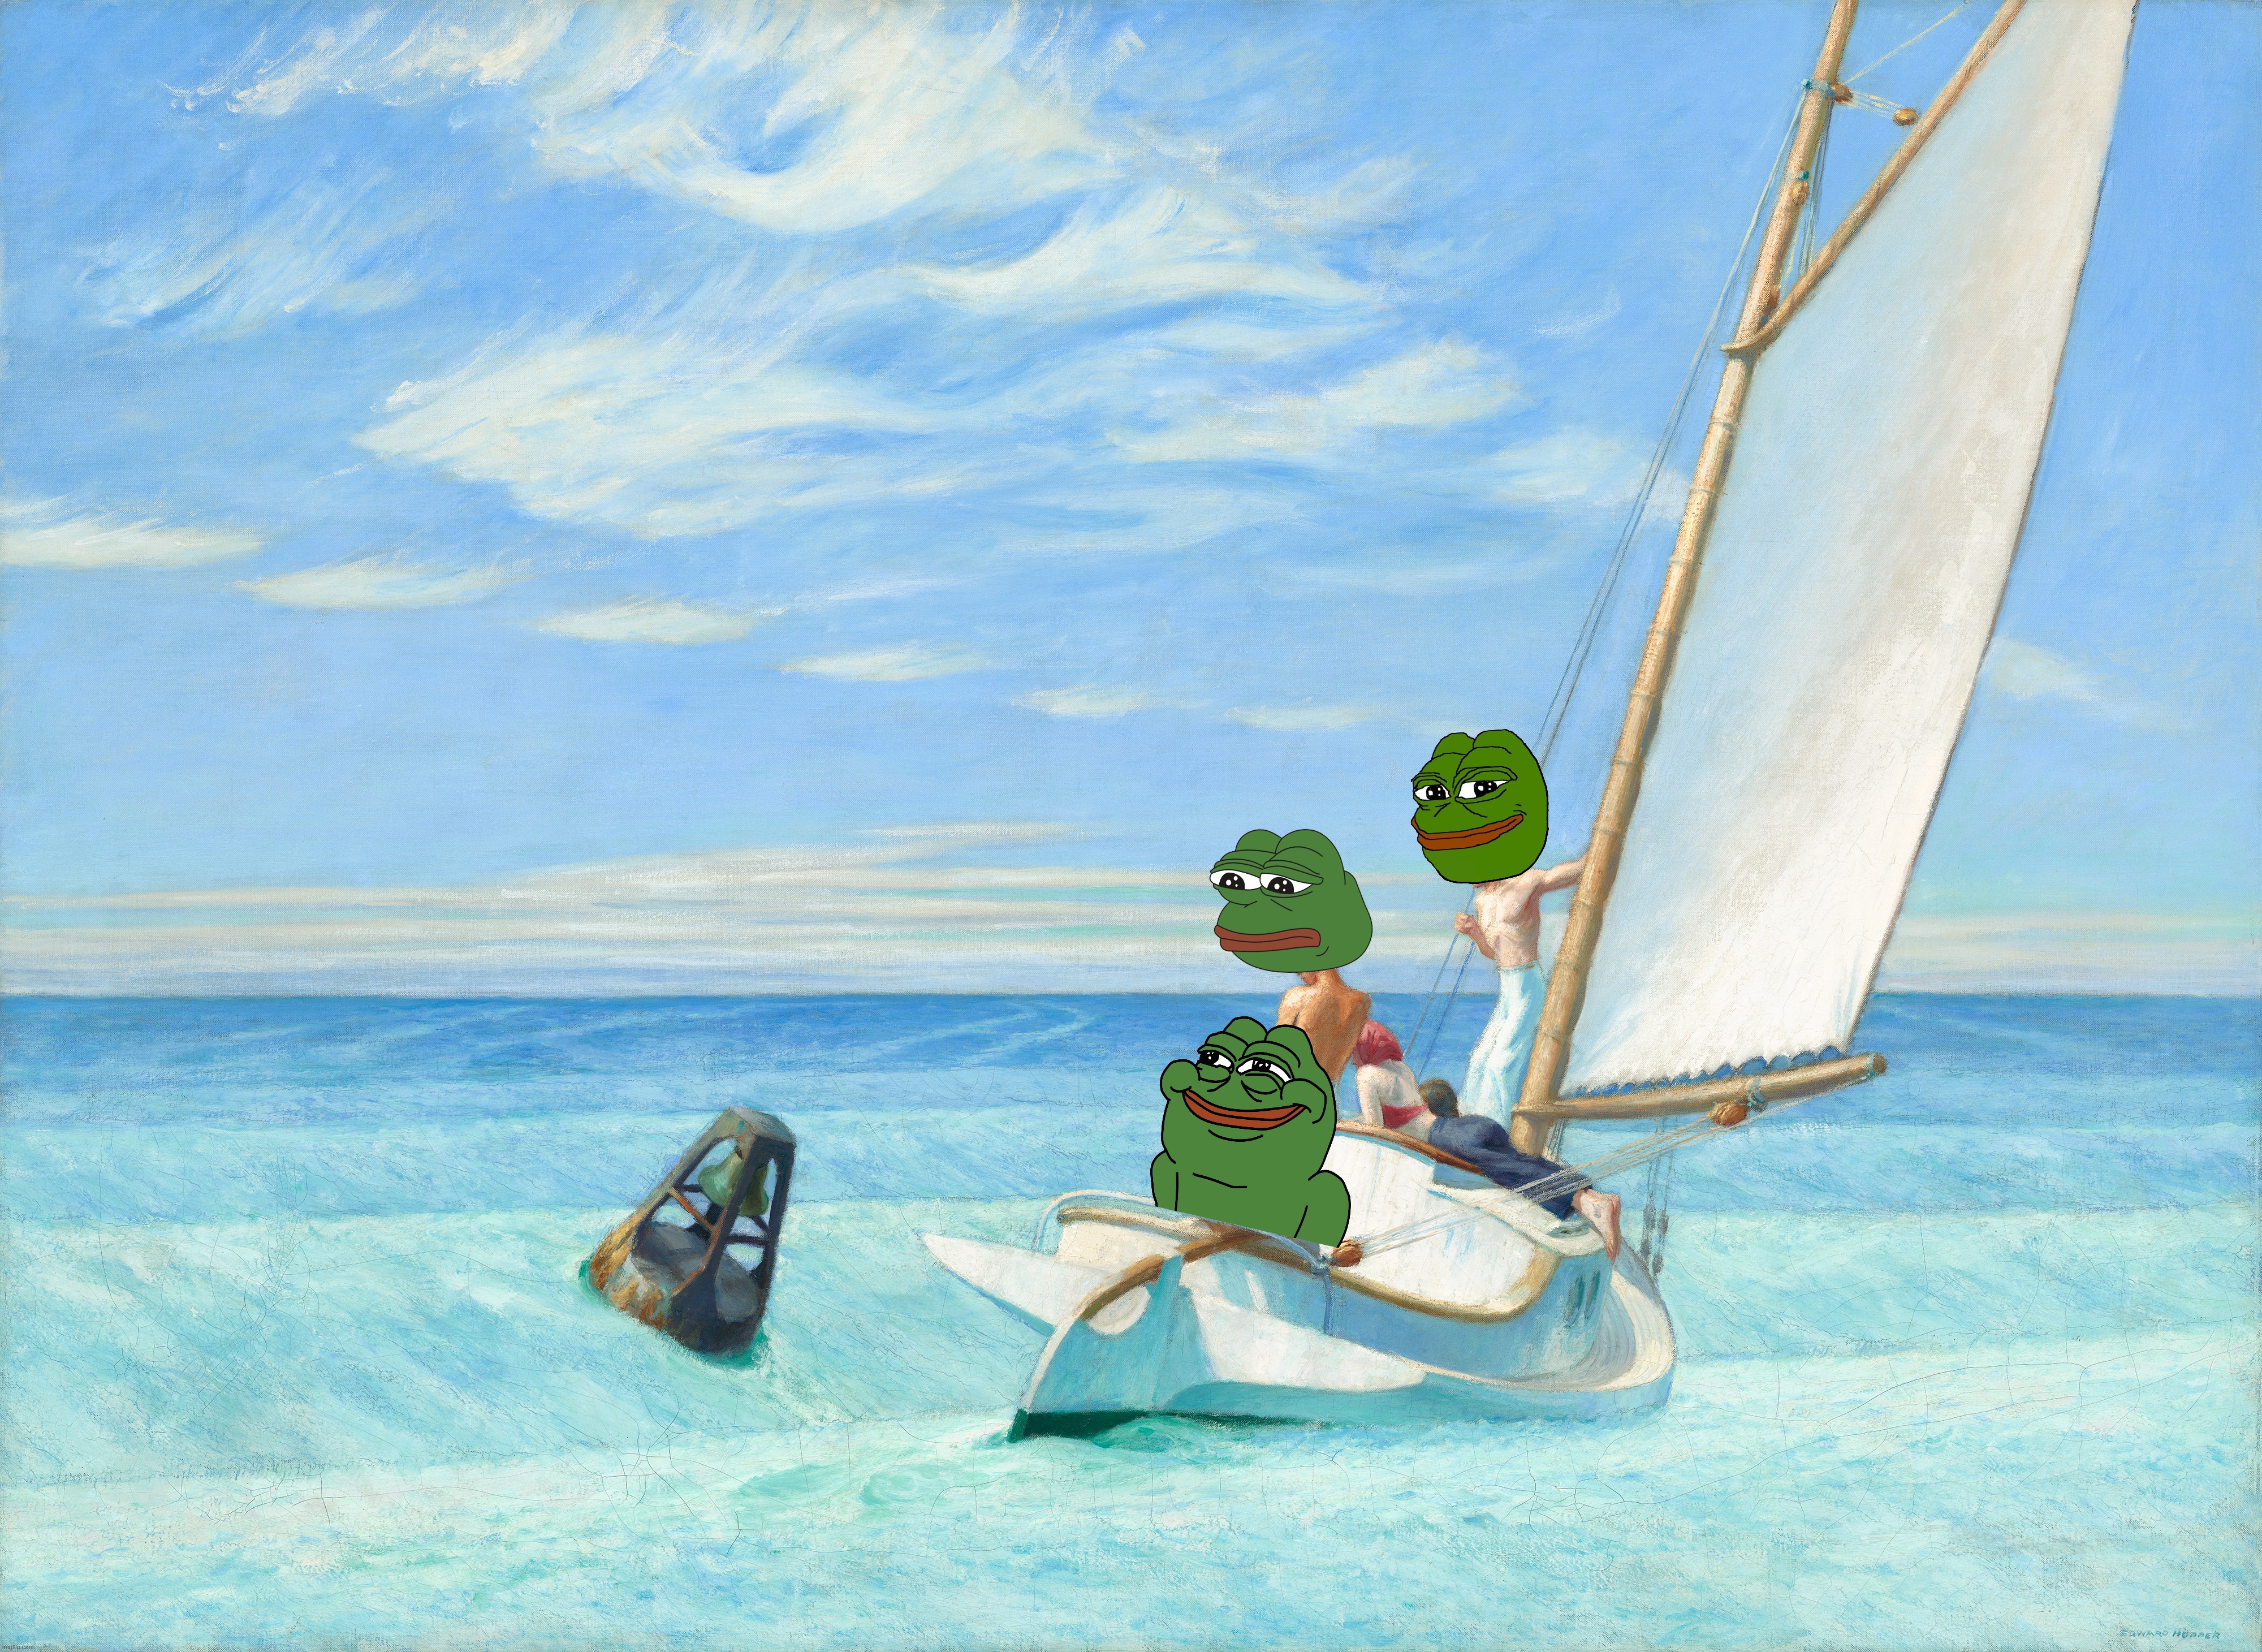 Pepe Ground Swell | image tagged in art,pepe,pepe the frog,memes | made w/ Imgflip meme maker